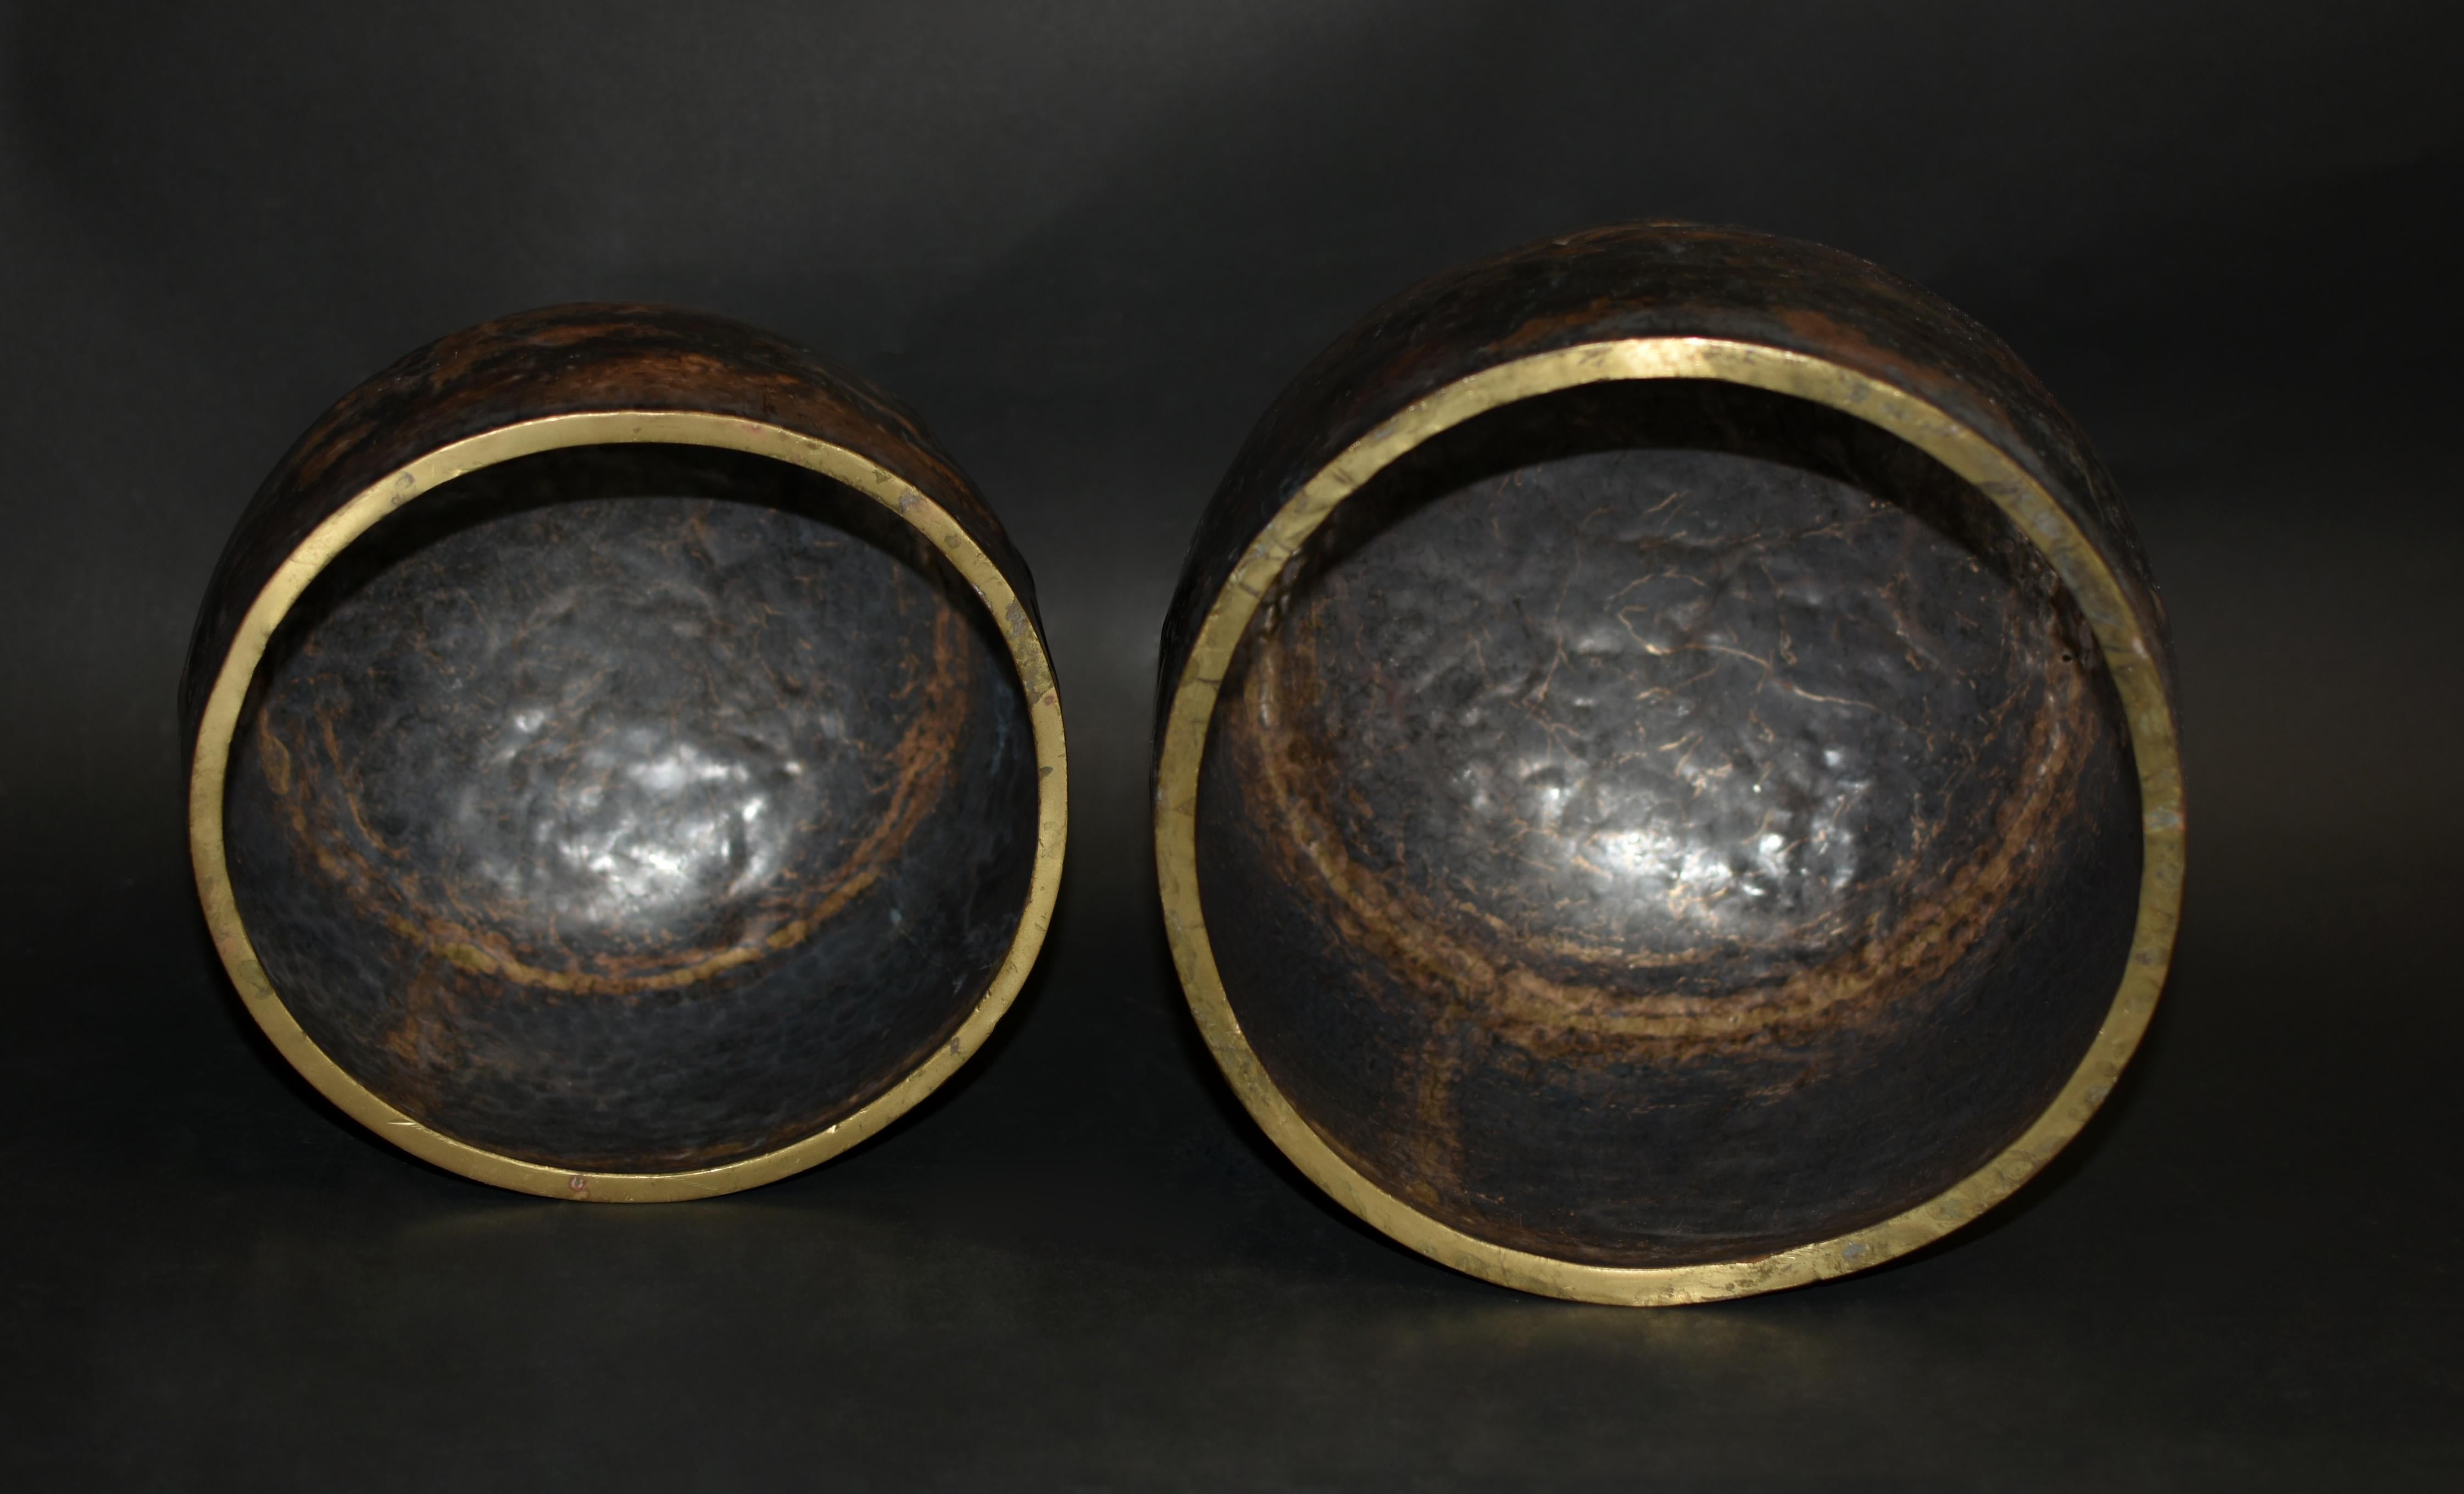 A set of very special antique Japanese singing bowls. These substantial, solid bronze bowls were hand crafted by master artisans, weighing nearly 7.5 lb together. Thick 1/2